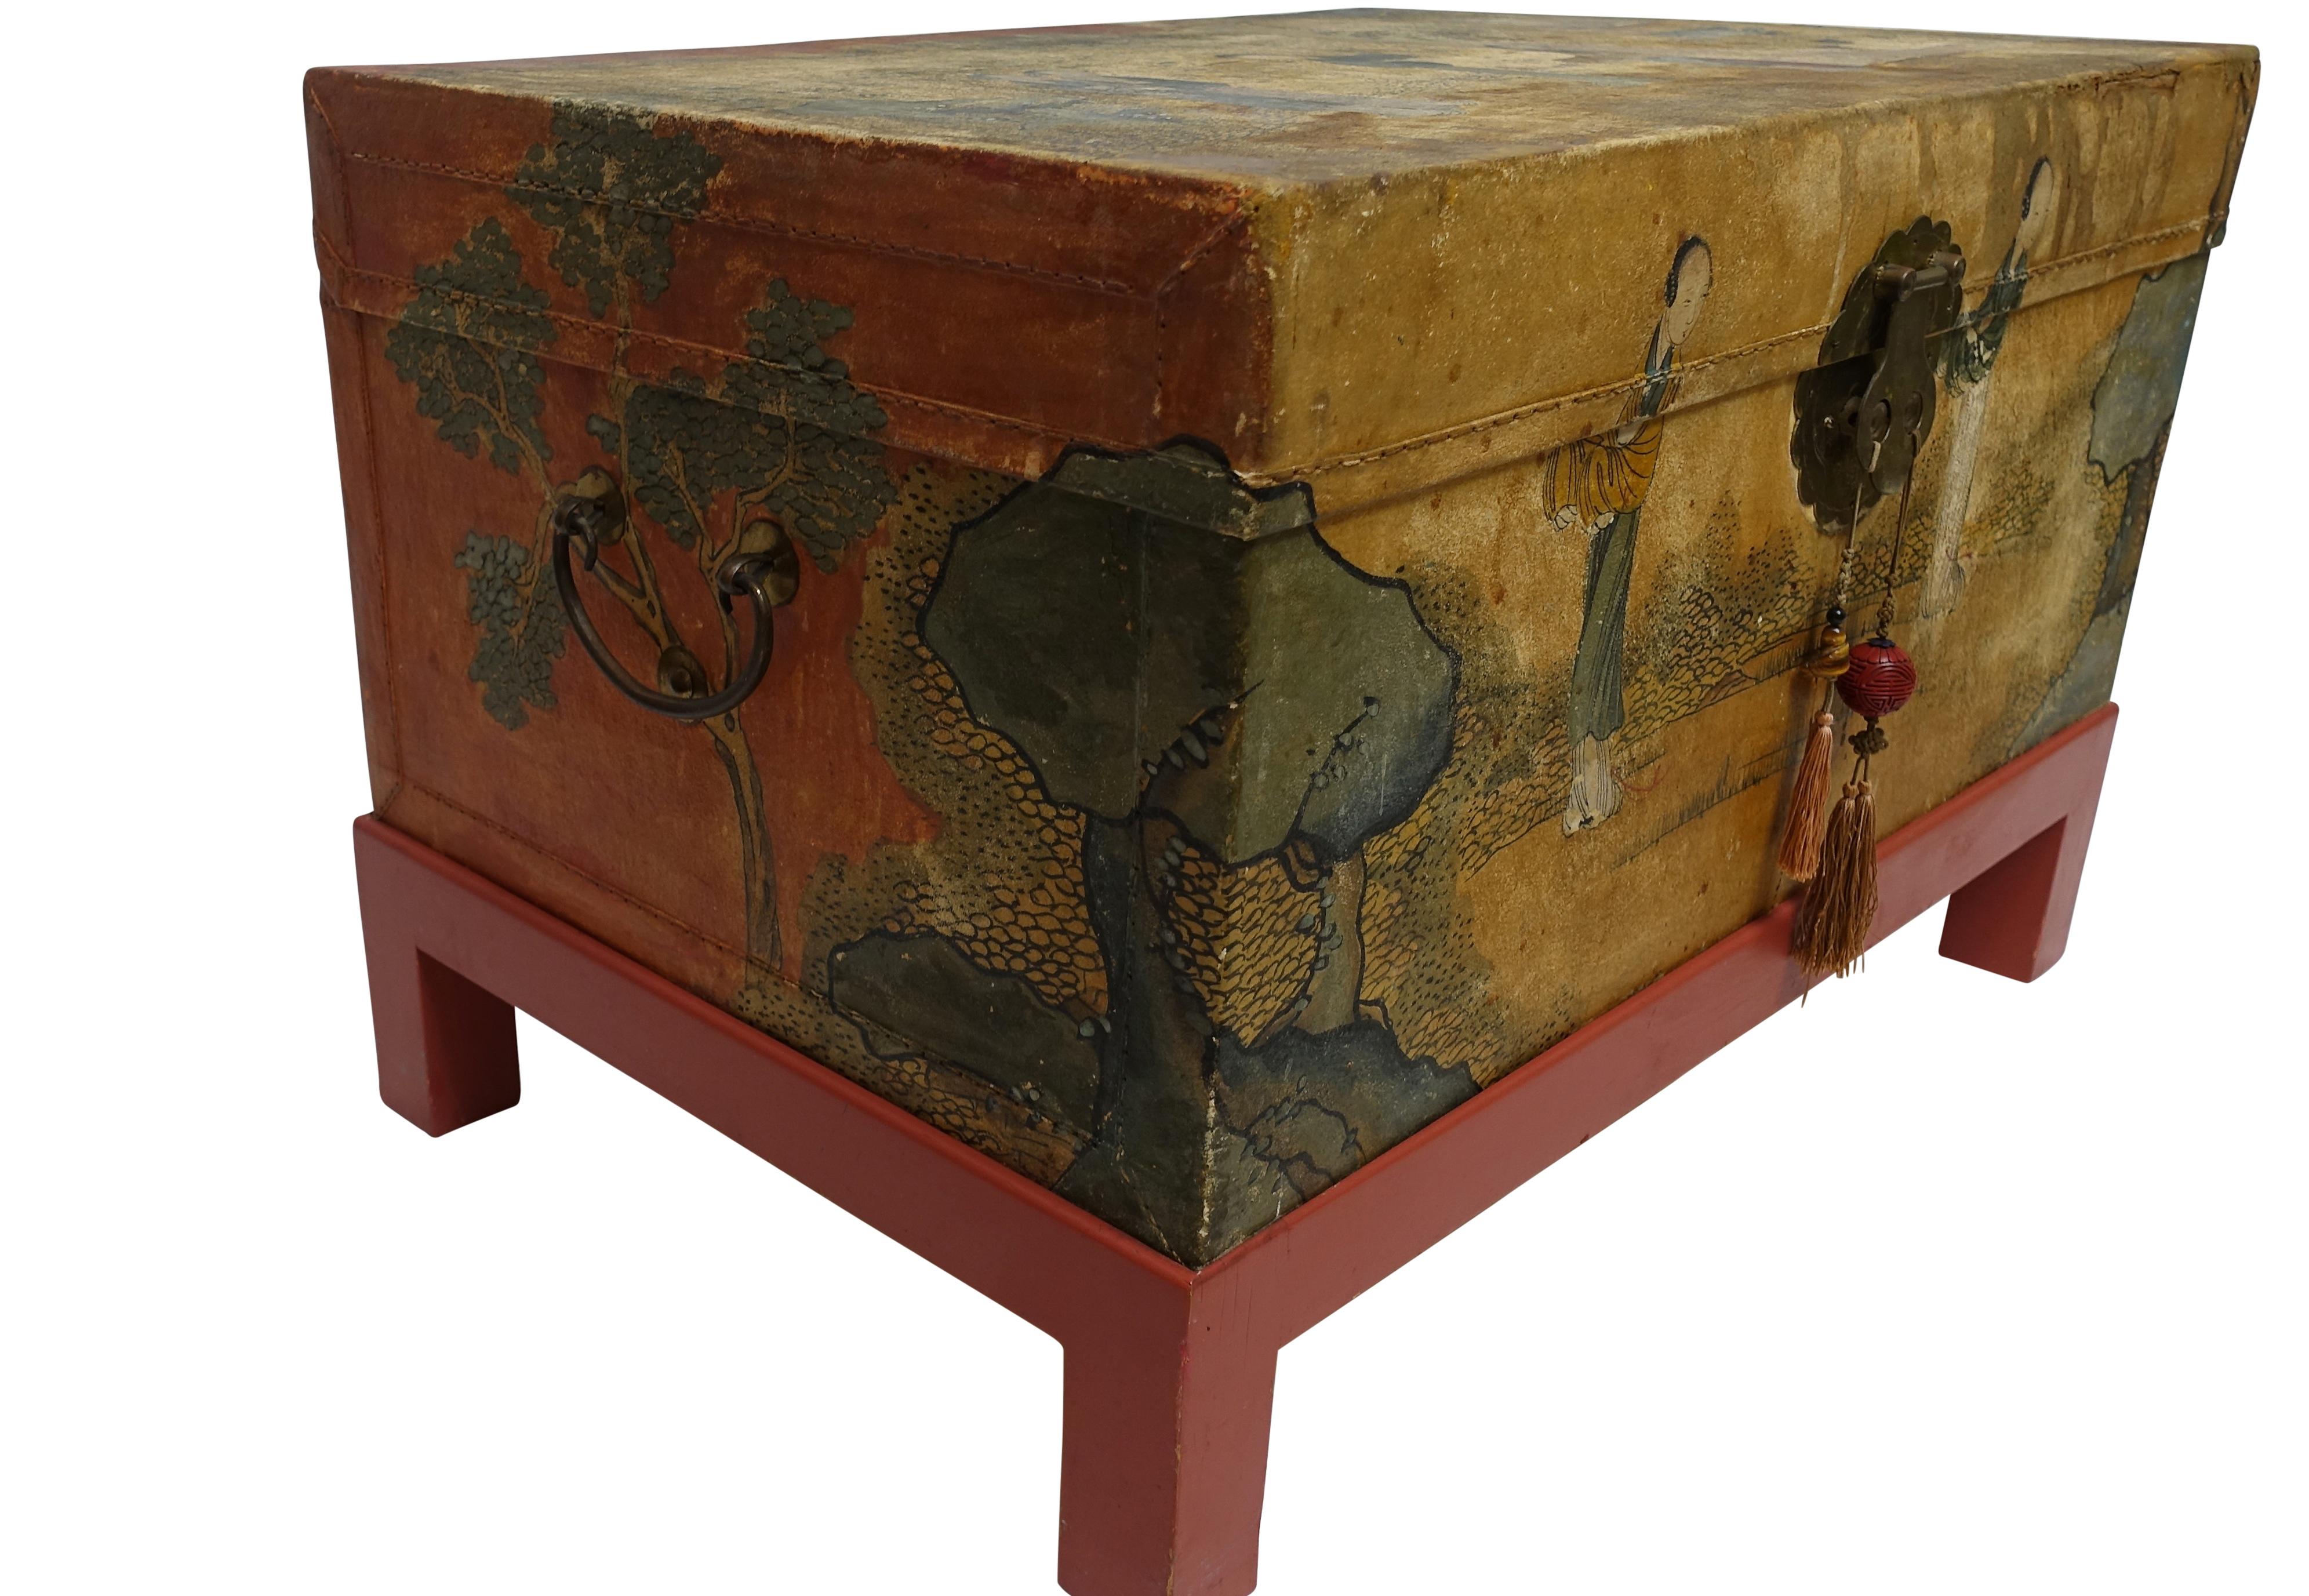 Chinese Export Hand-Painted Leather Trunk on Stand, Early 20th Century 1